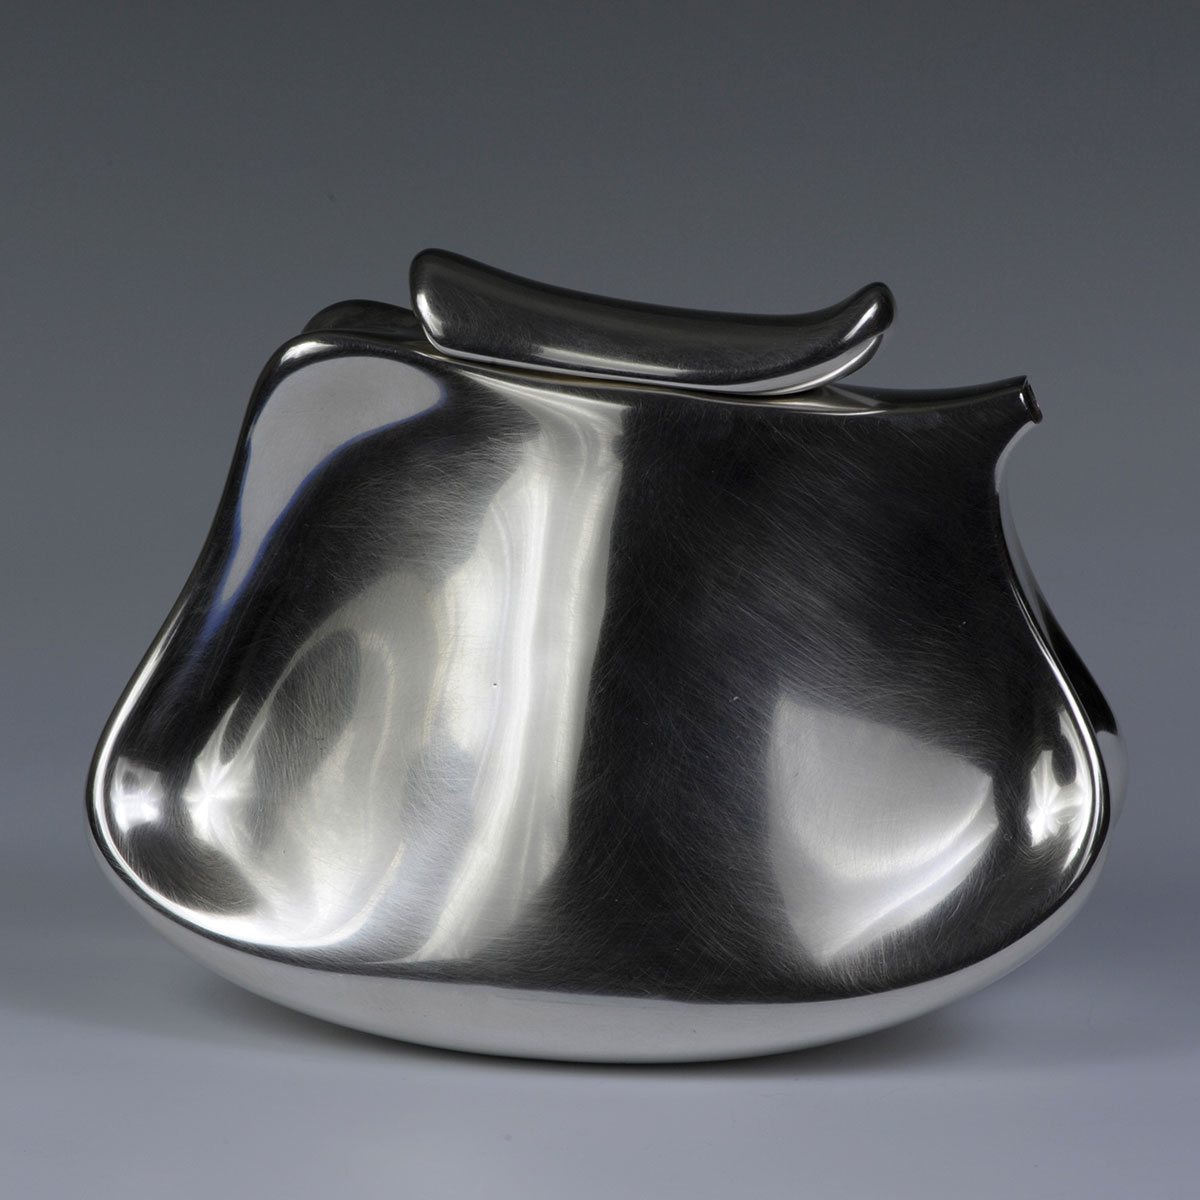 UNTITLED (DECANTER)